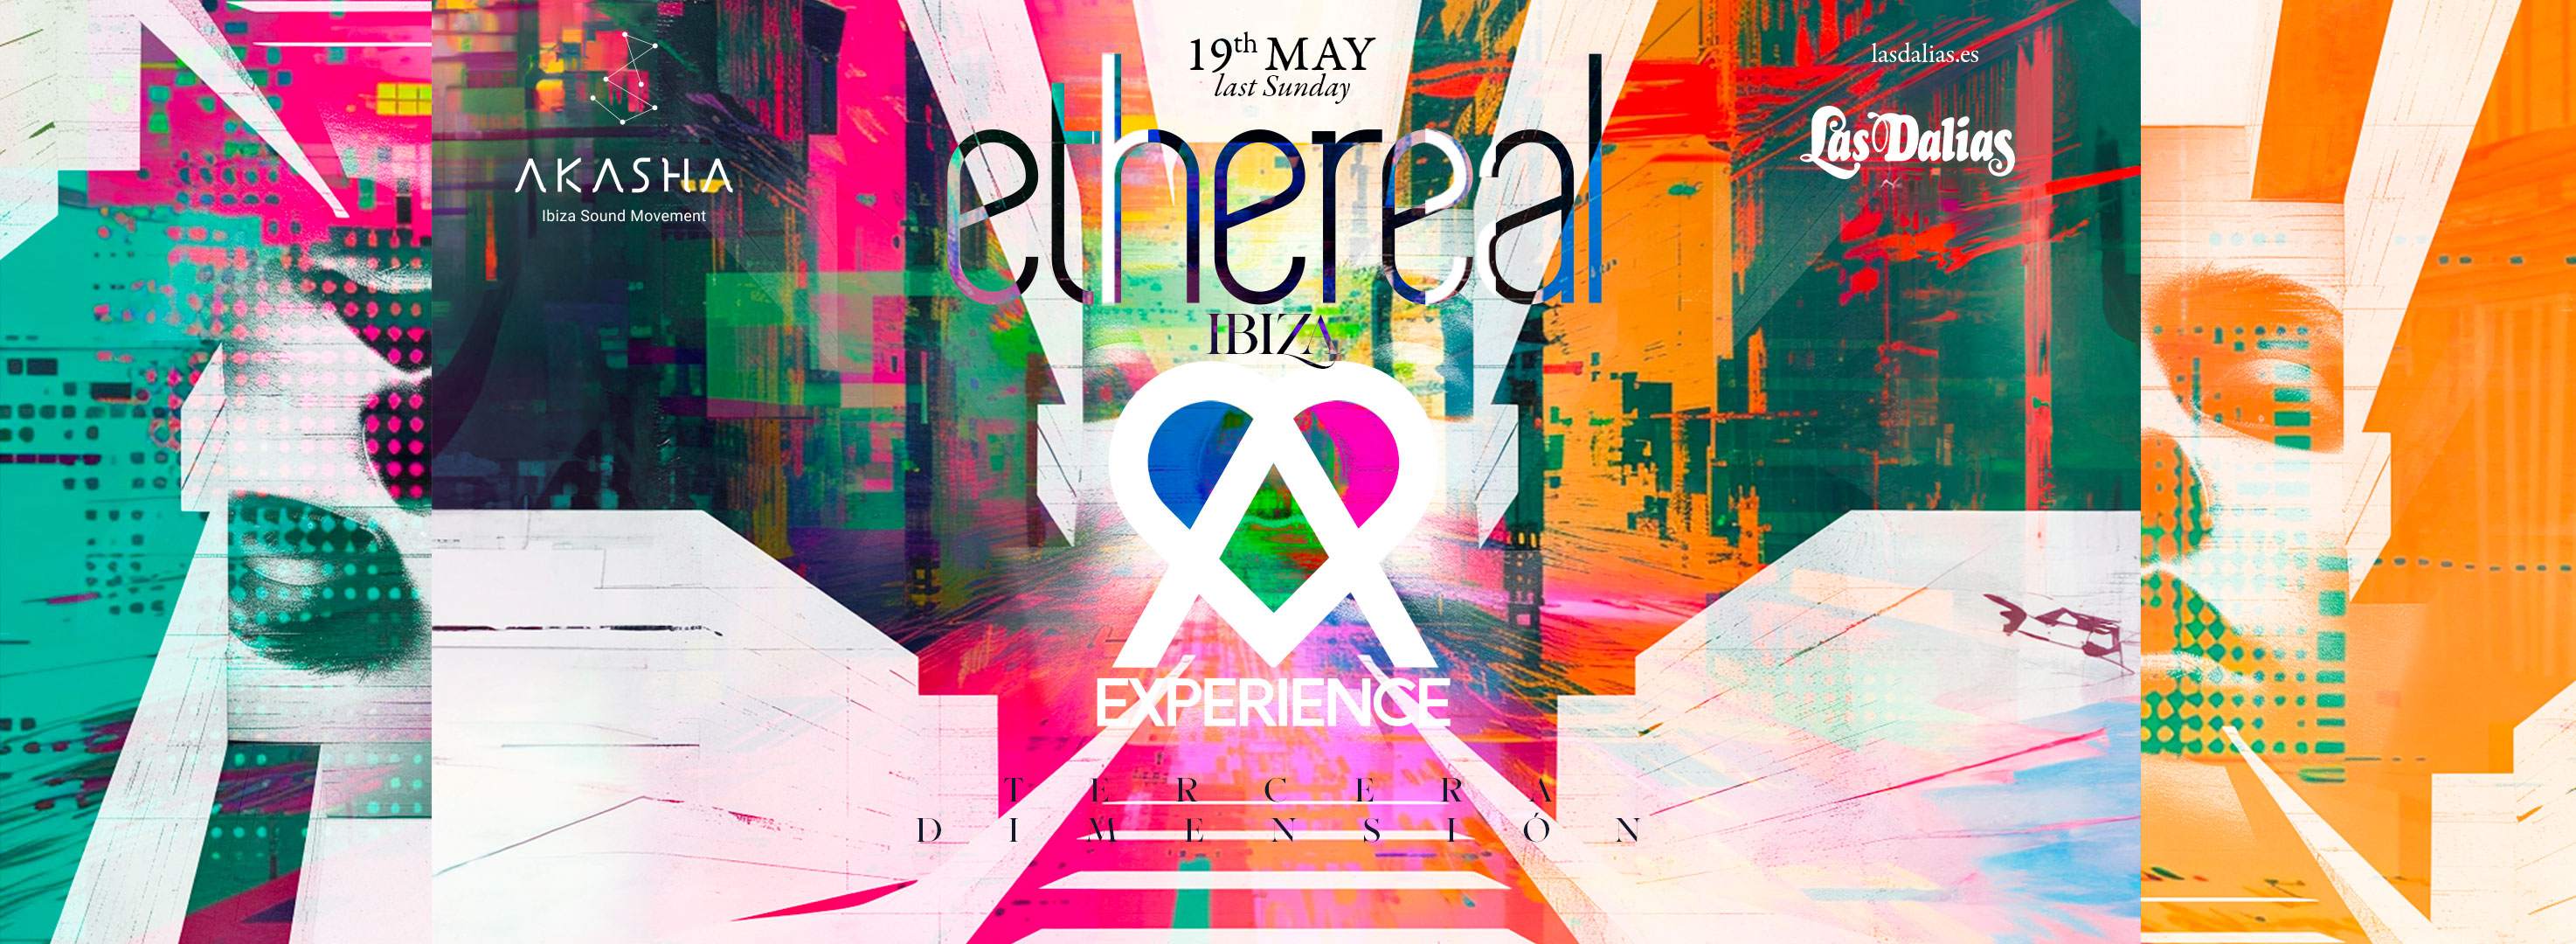 Amore Ethereal Experience - フライヤー表